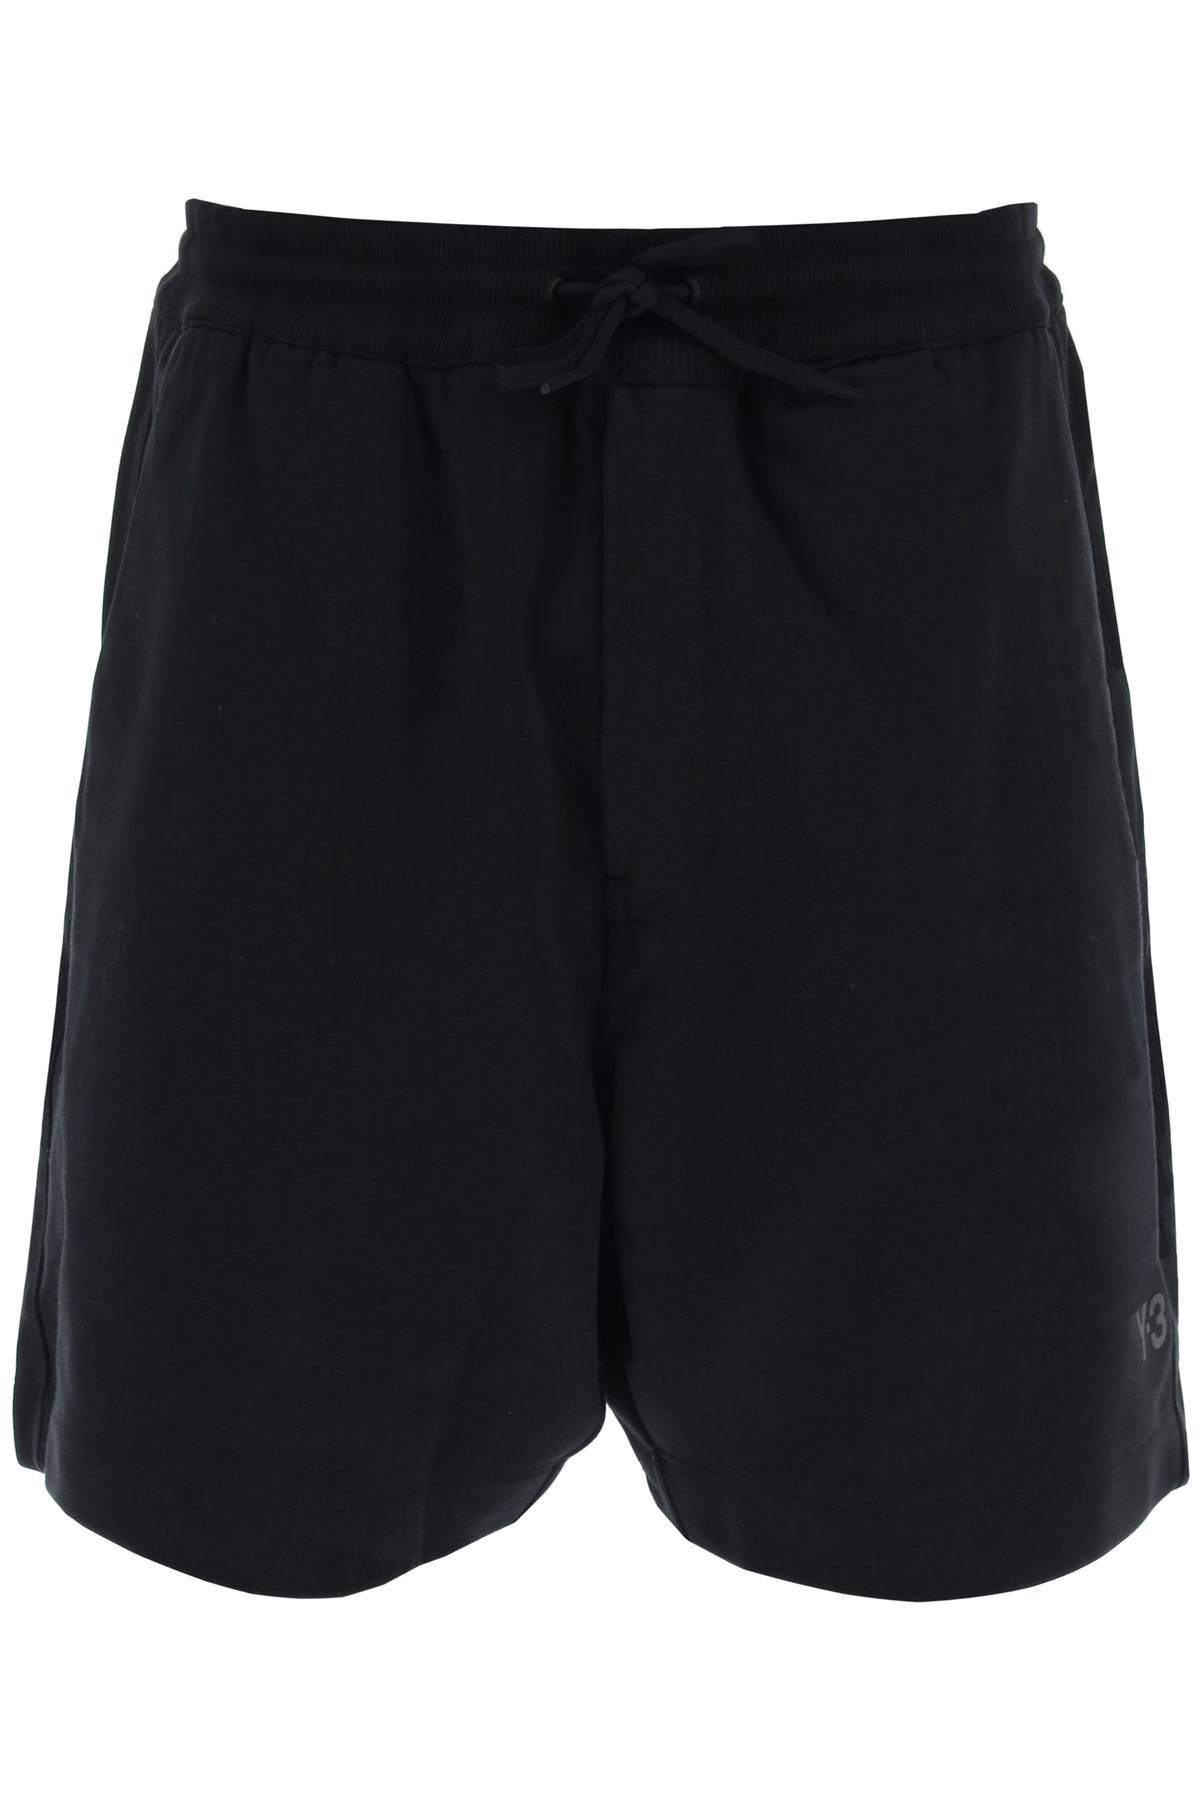 Y-3 FRENCH TERRY JOGGER BERMUDA SHORTS